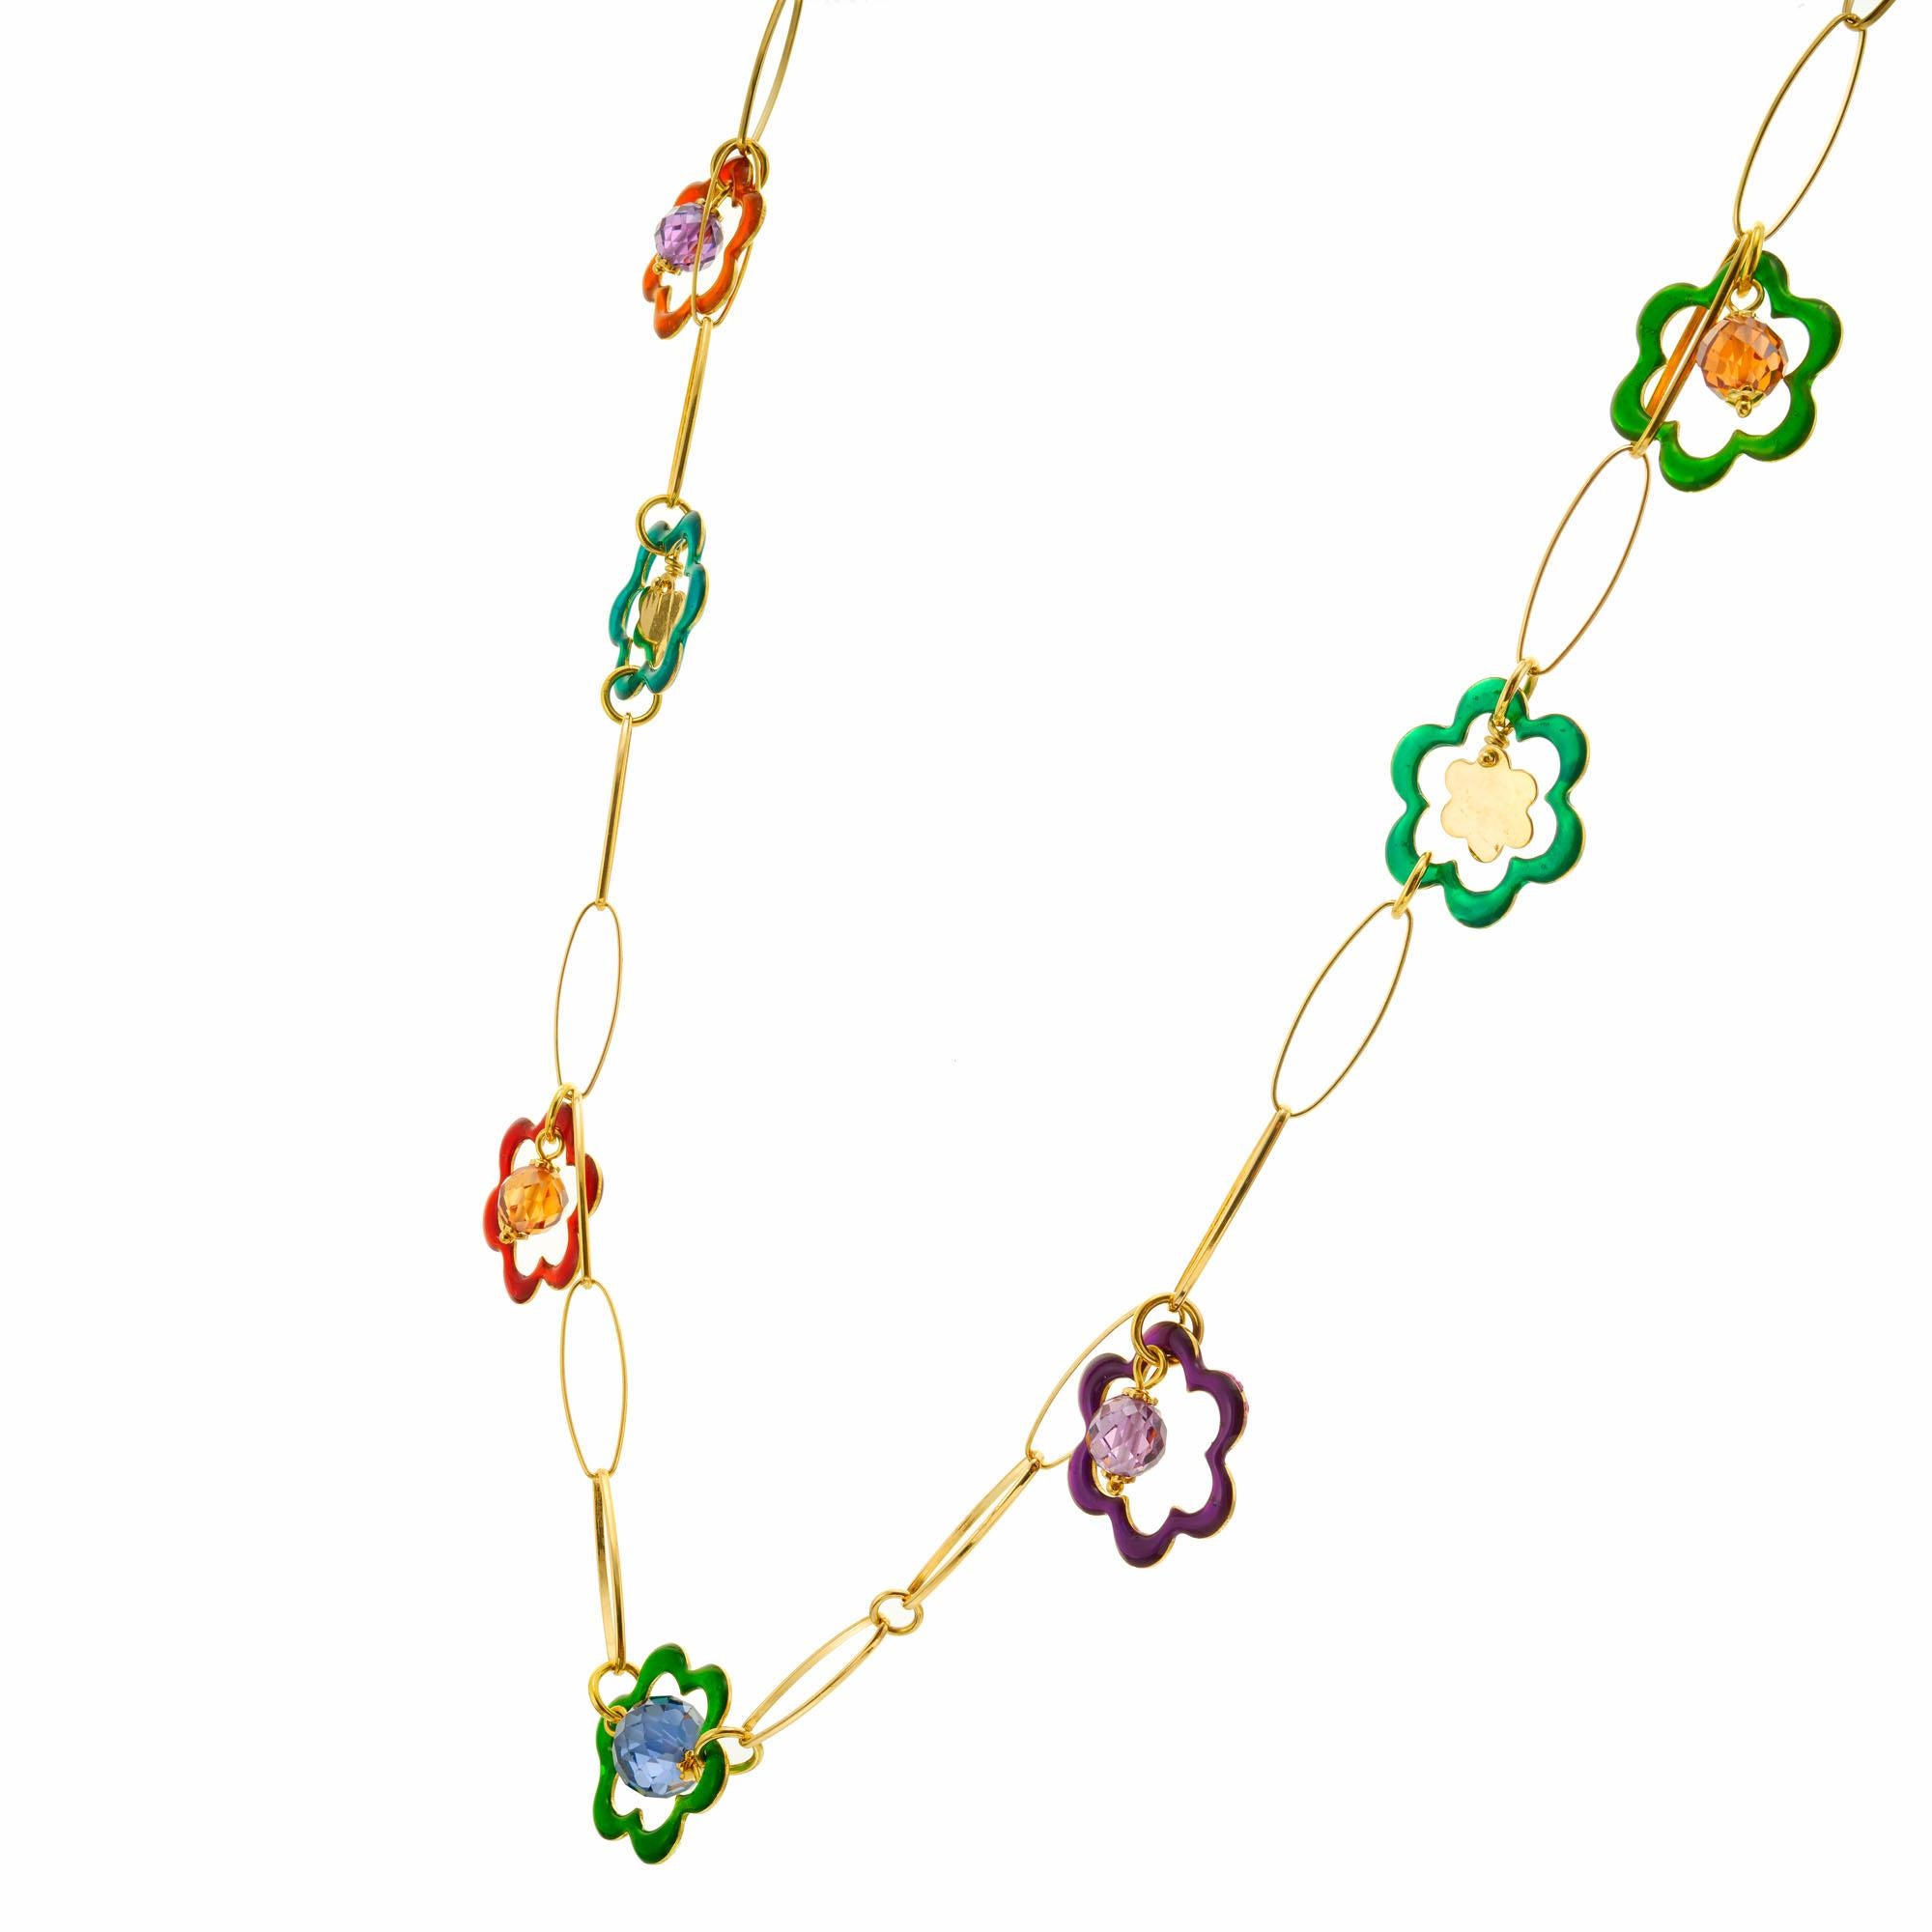 Purple, green and red enamel 18k gold paper clip link necklace. 20 inches in length. 8 enamel colored frames with 6 faceted colored beads. 

6 faceted colored beads, 5.7 -8.0mm
8 enamel colored frames 
18k yellow gold 
19.1 grams
Top to bottom: